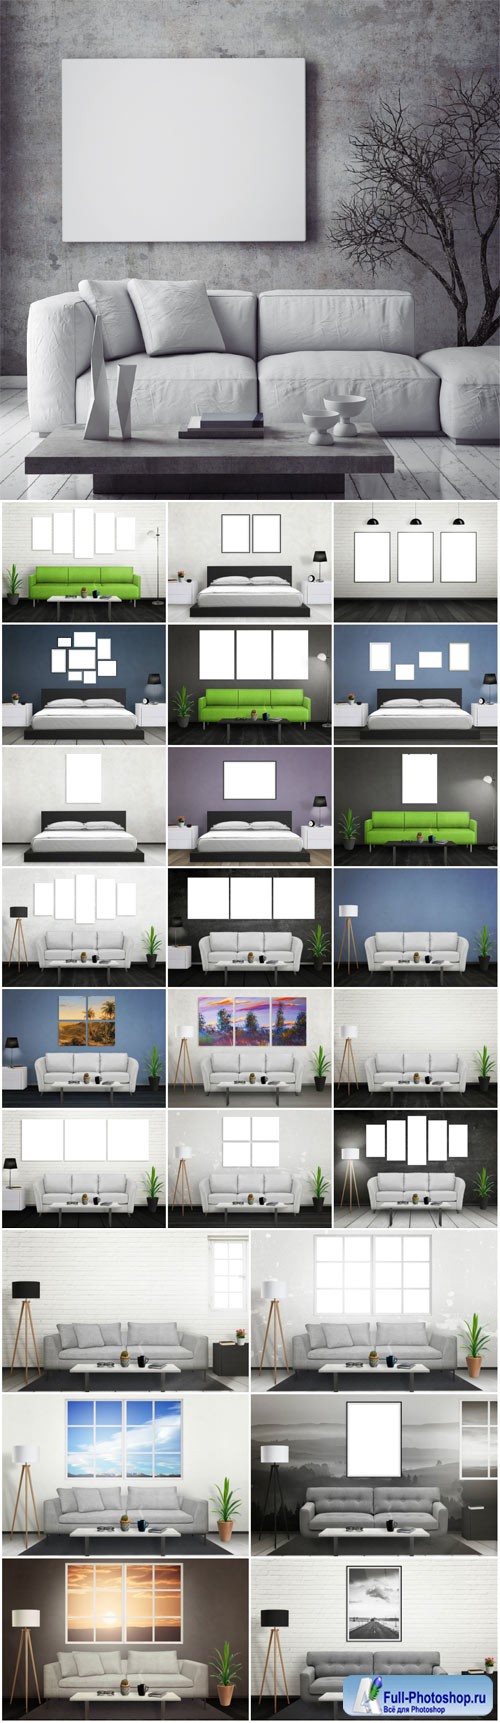 Sofas on wall background with picture stock photo